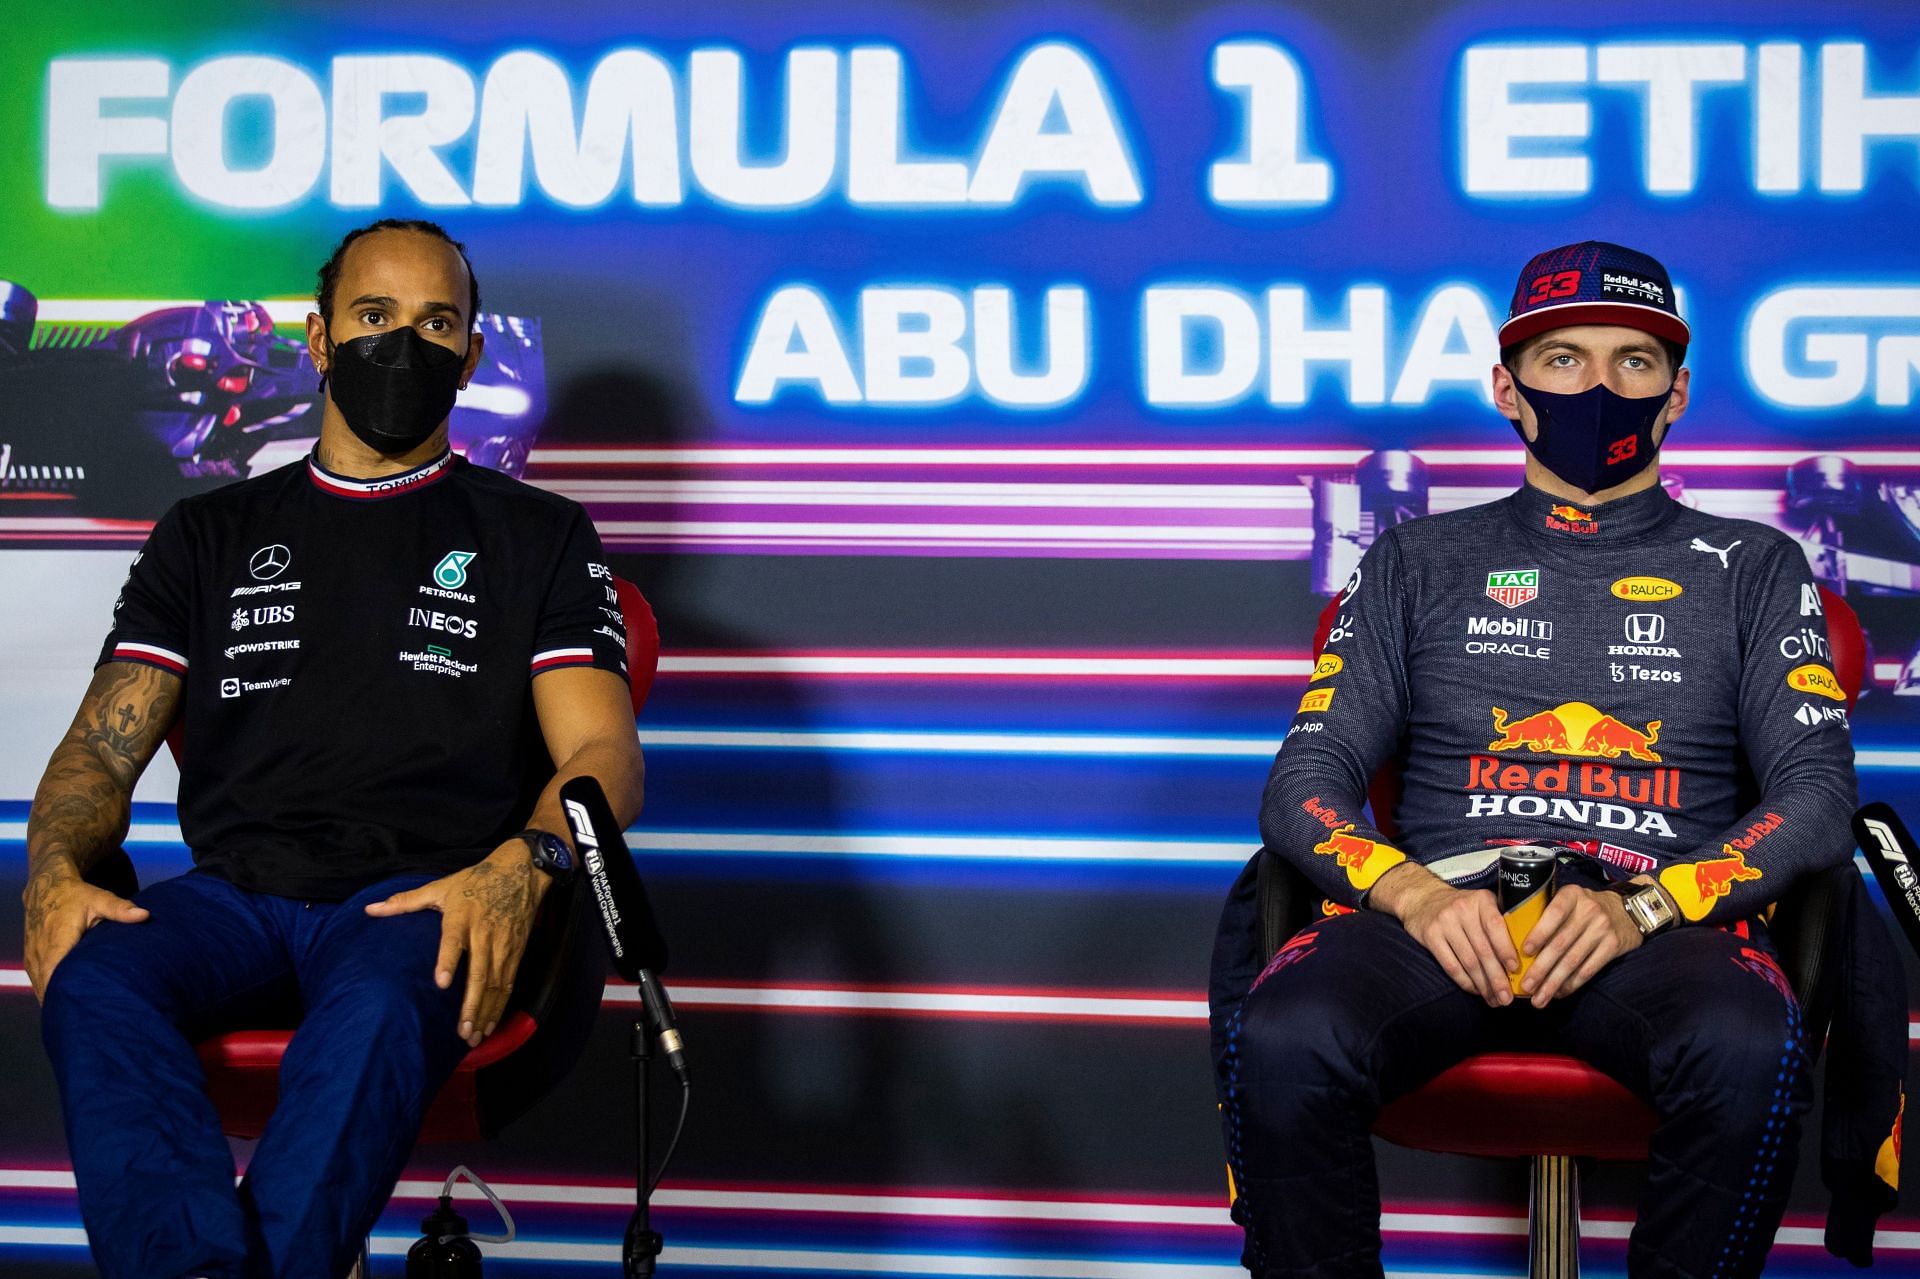 Max Verstappen oand Lewis Hamilton talk in the press conference ahead of the season finale. (Photo by Sam Bloxham - Pool/Getty Images)